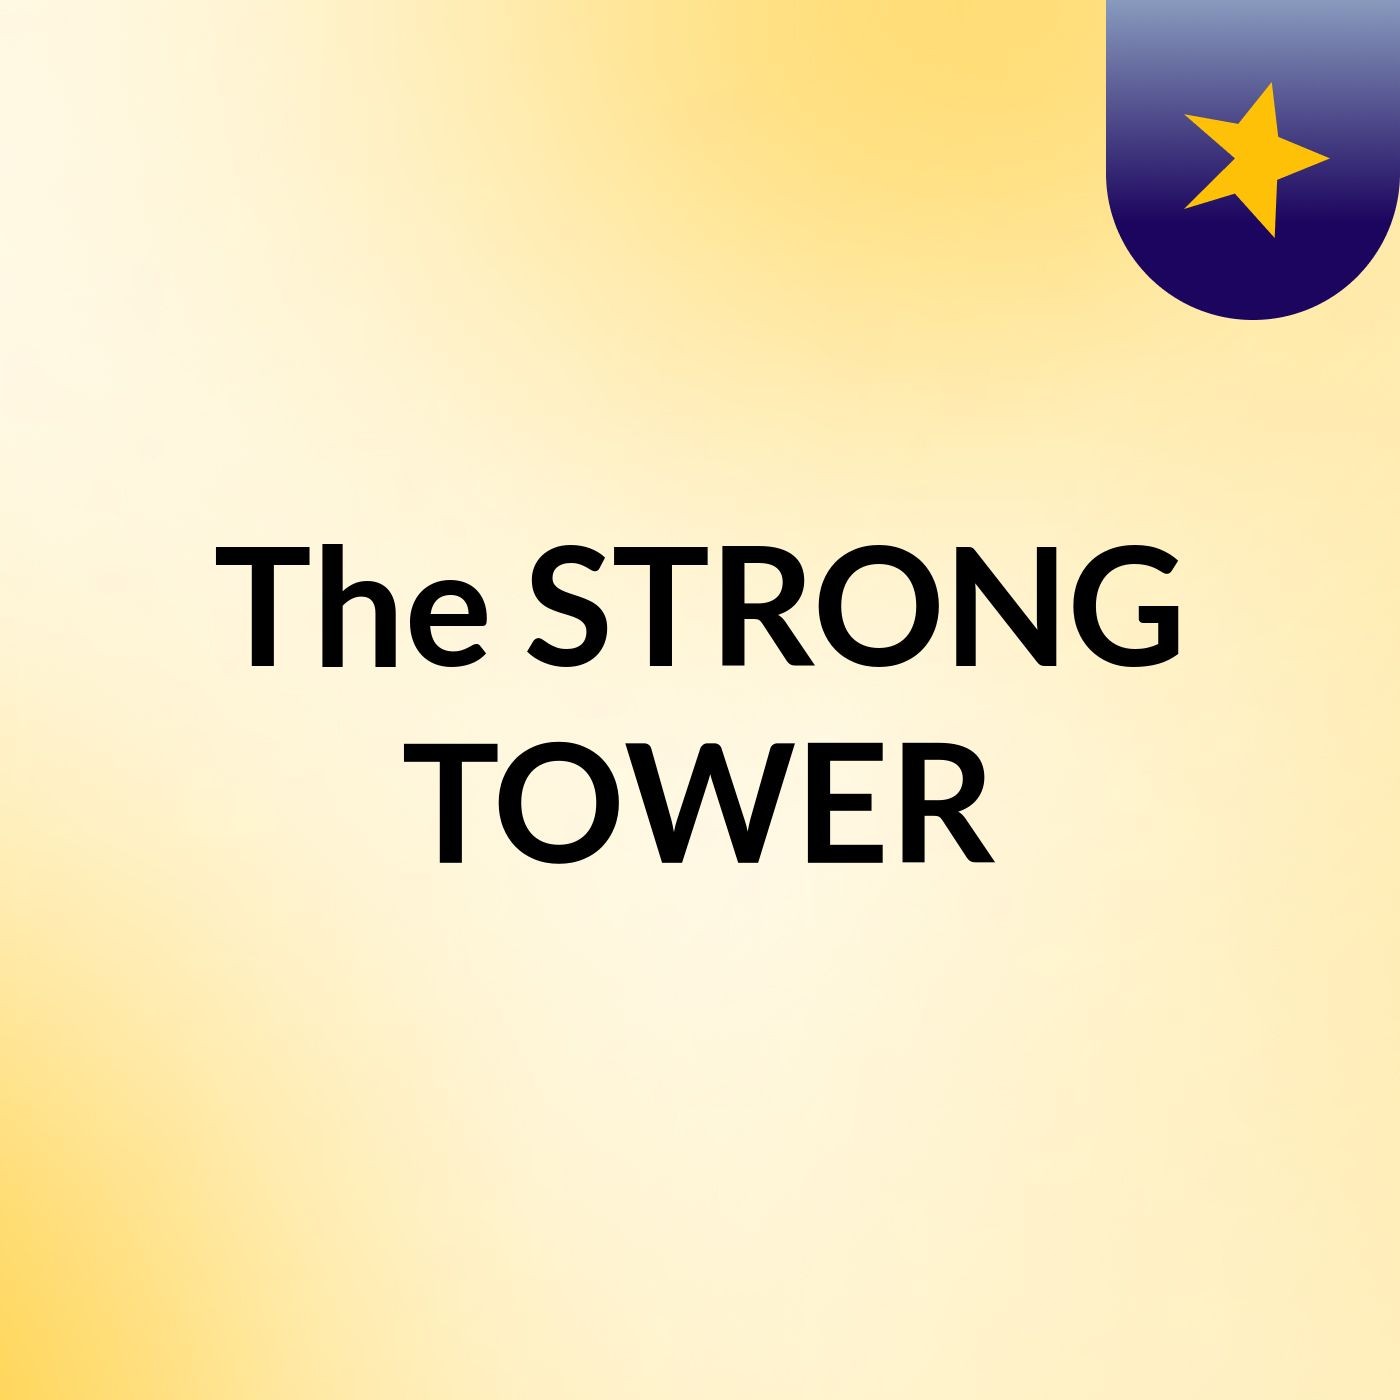 The STRONG TOWER